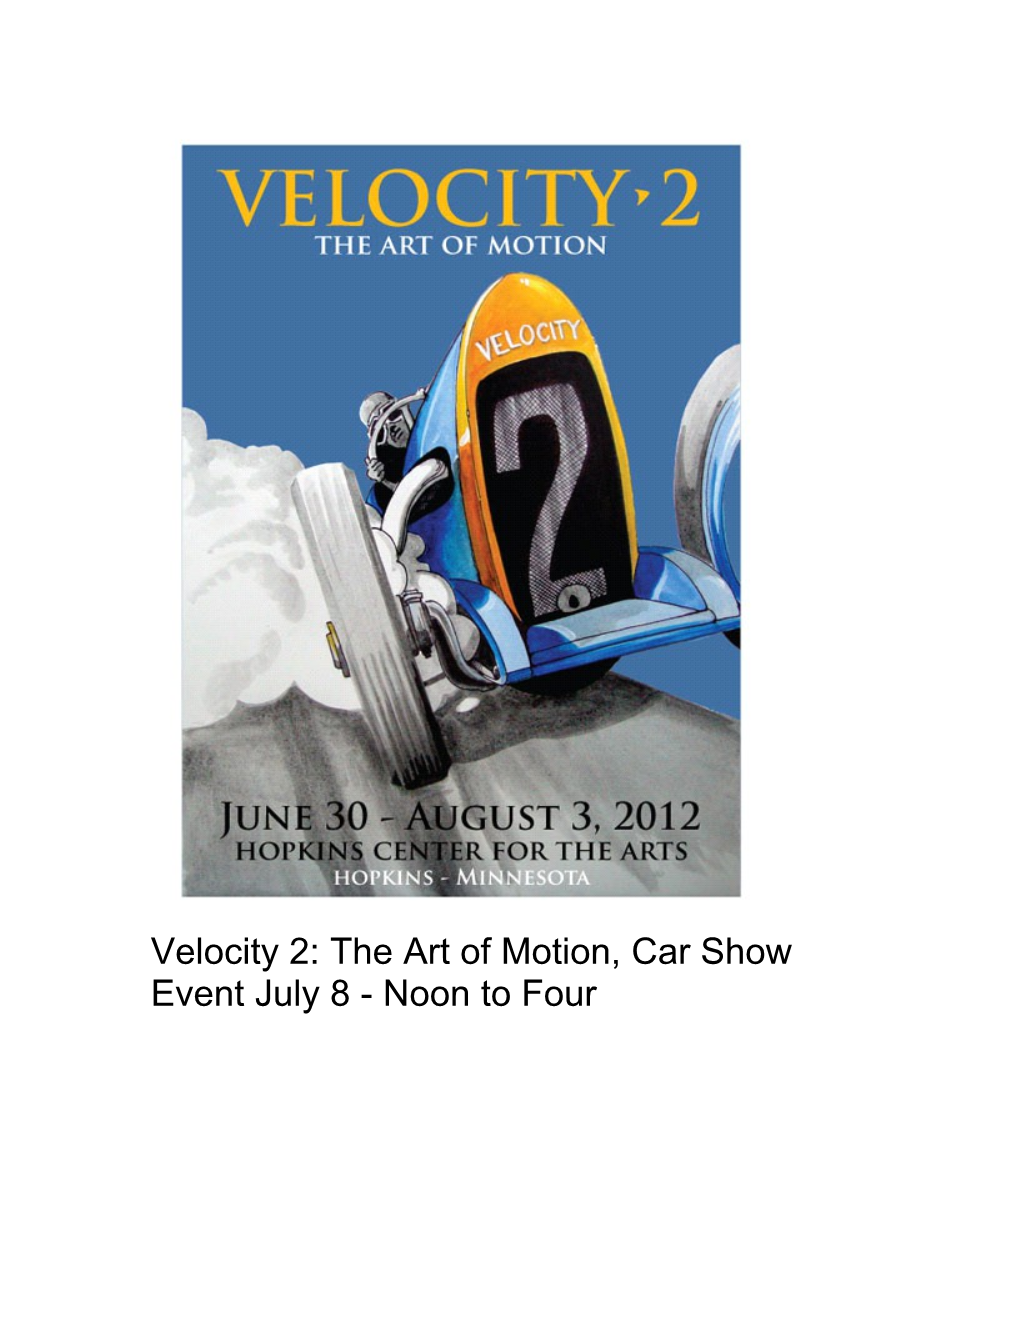 Velocity 2: the Art of Motion, Car Show Event July 8 - Noon to Four